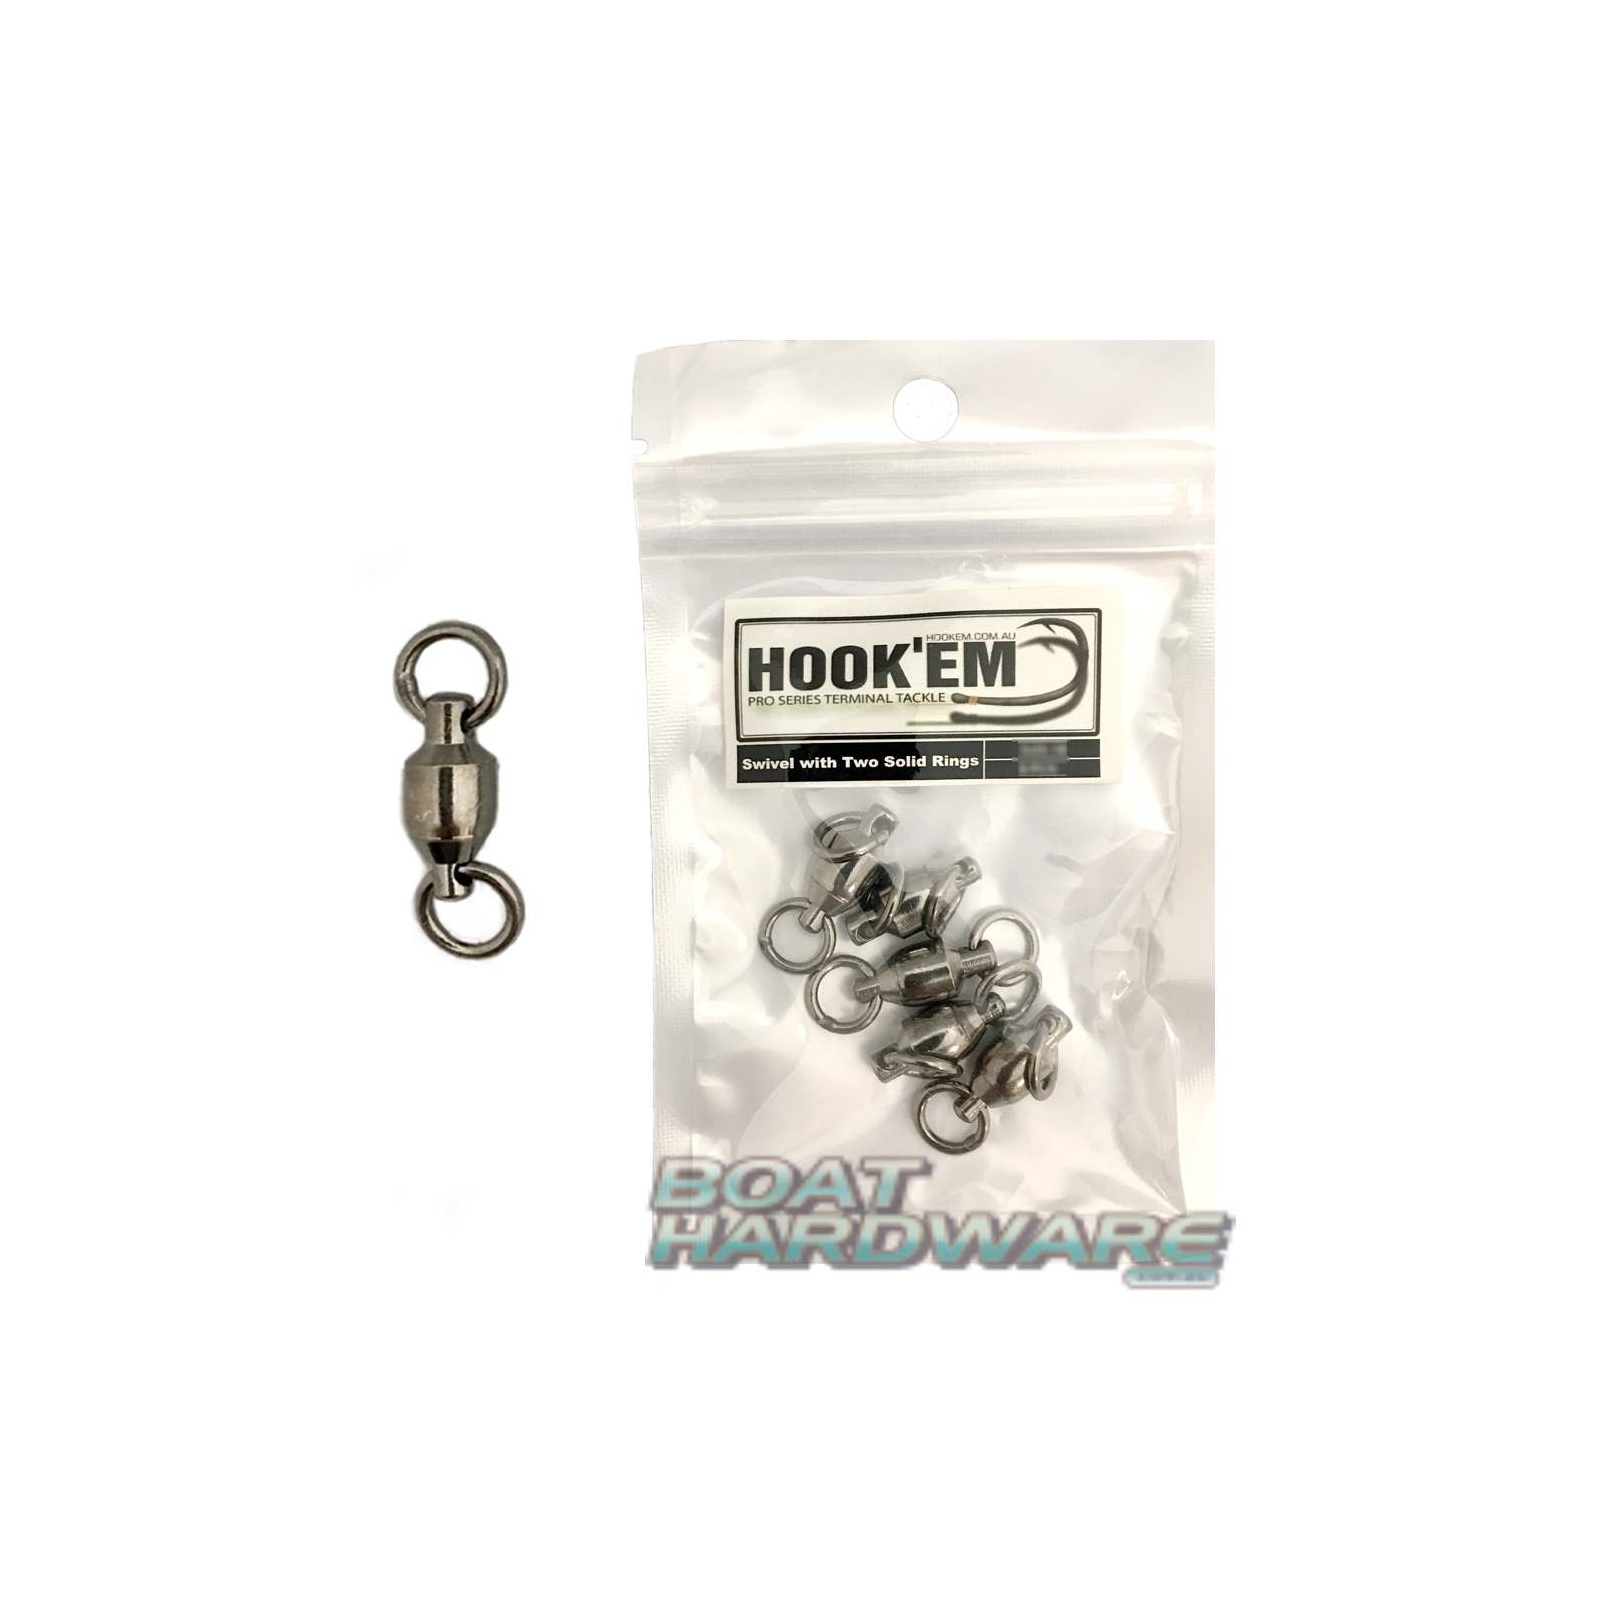 Size 5 Ball Bearing Swivel - 2 Solid Rings (Pack of 8)